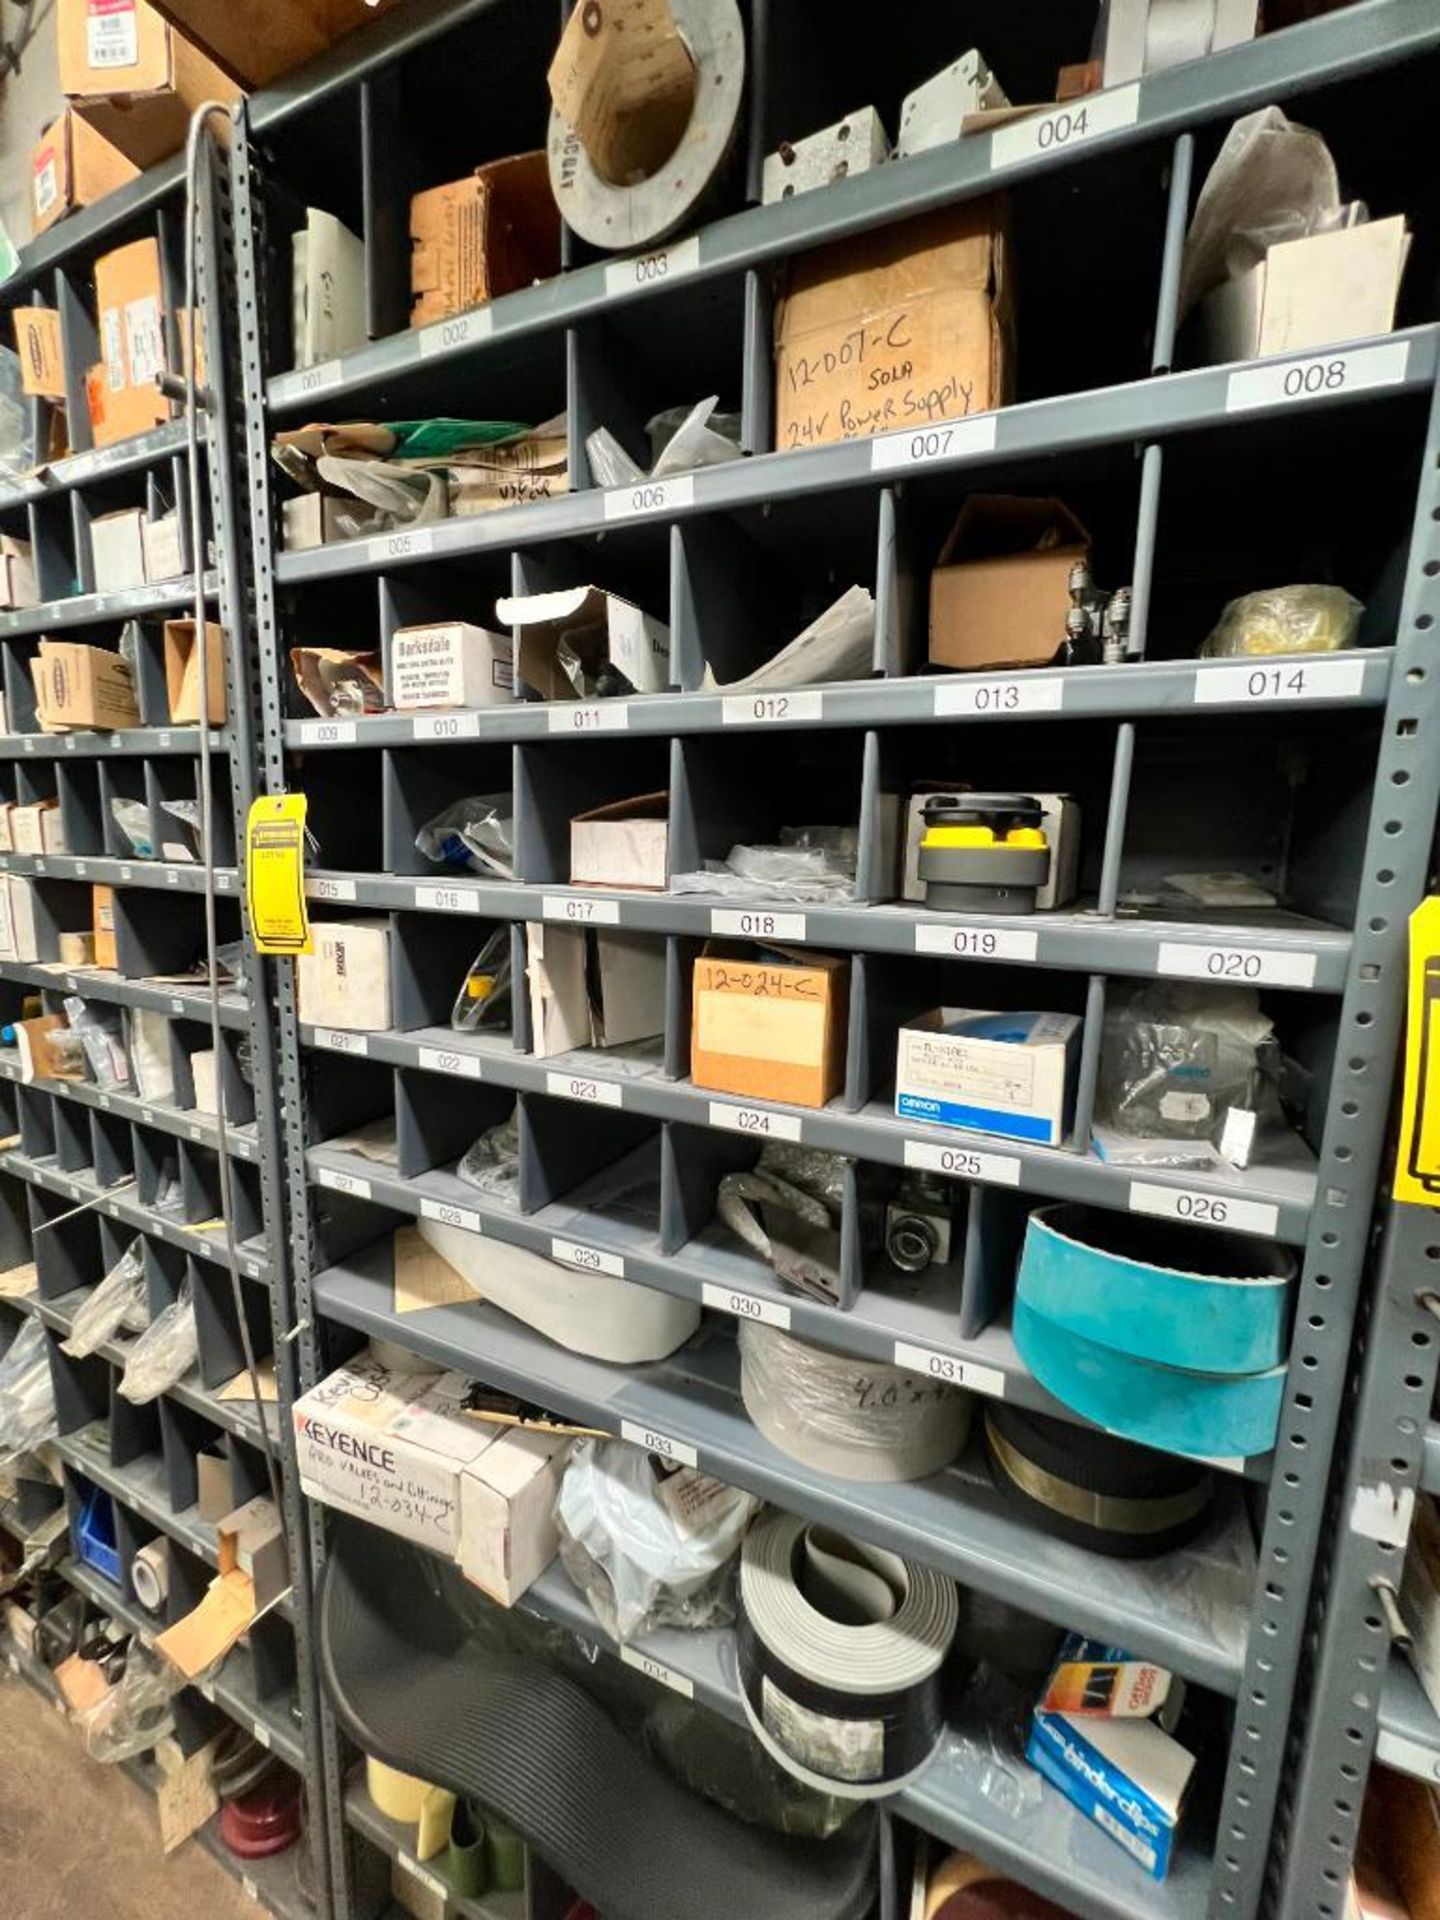 (28) Shelves of Assorted Parts, VERY LARGE LOT Consisting of MRO, Drives, Valves, PLC, Nuts, Bolts, - Image 26 of 67